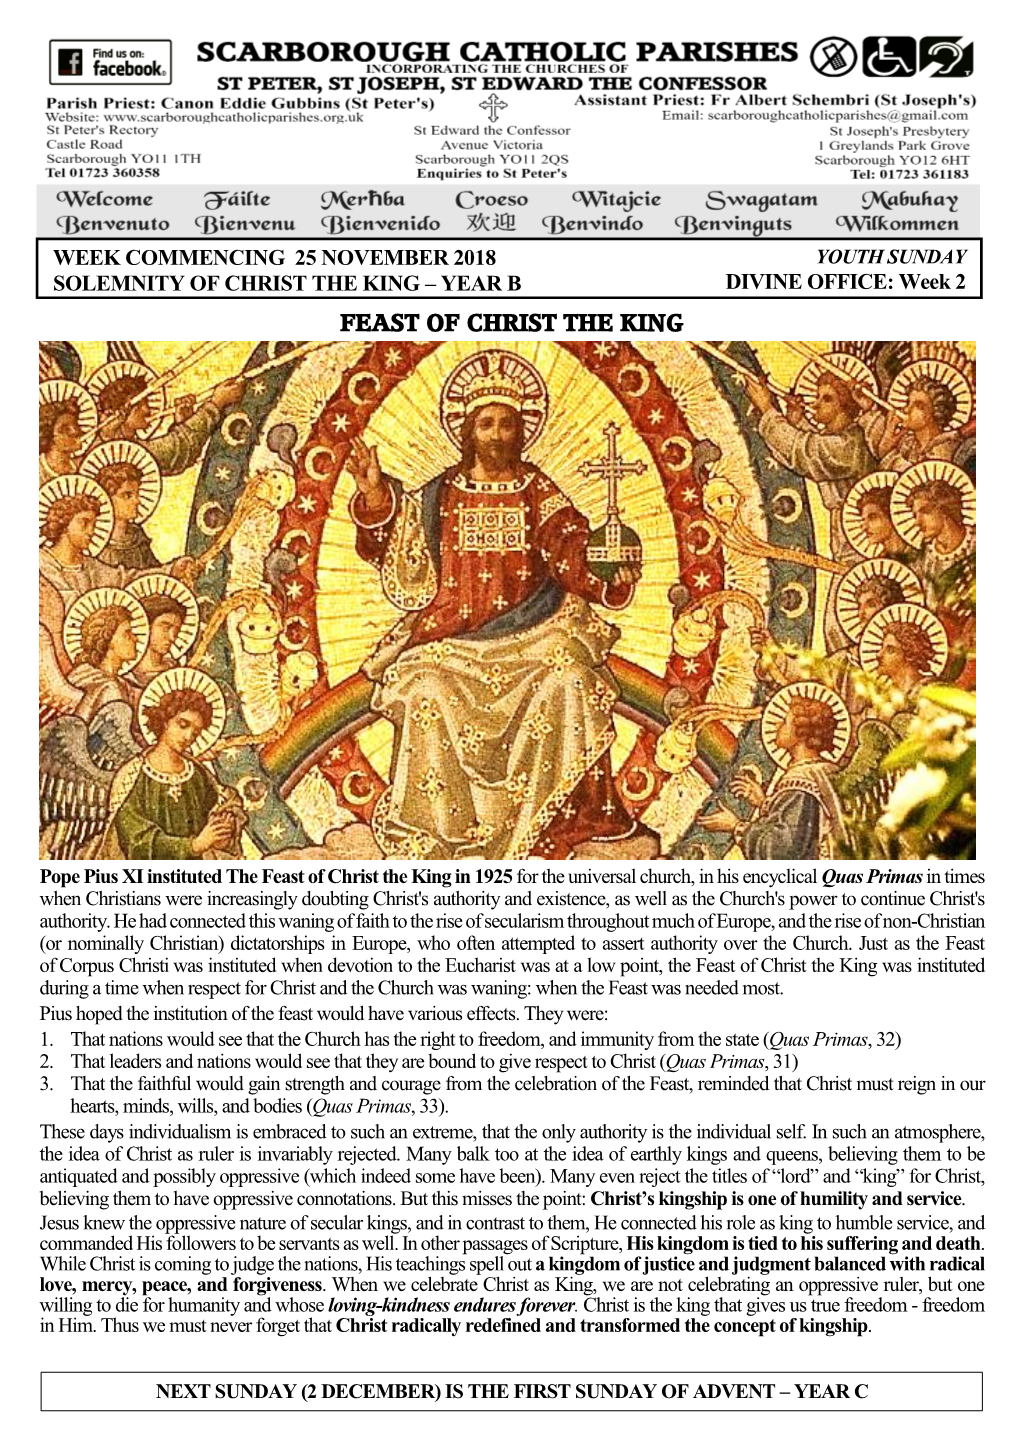 25 NOVEMBER 2018 YOUTH SUNDAY SOLEMNITY of CHRIST the KING – YEAR B DIVINE OFFICE: Week 2